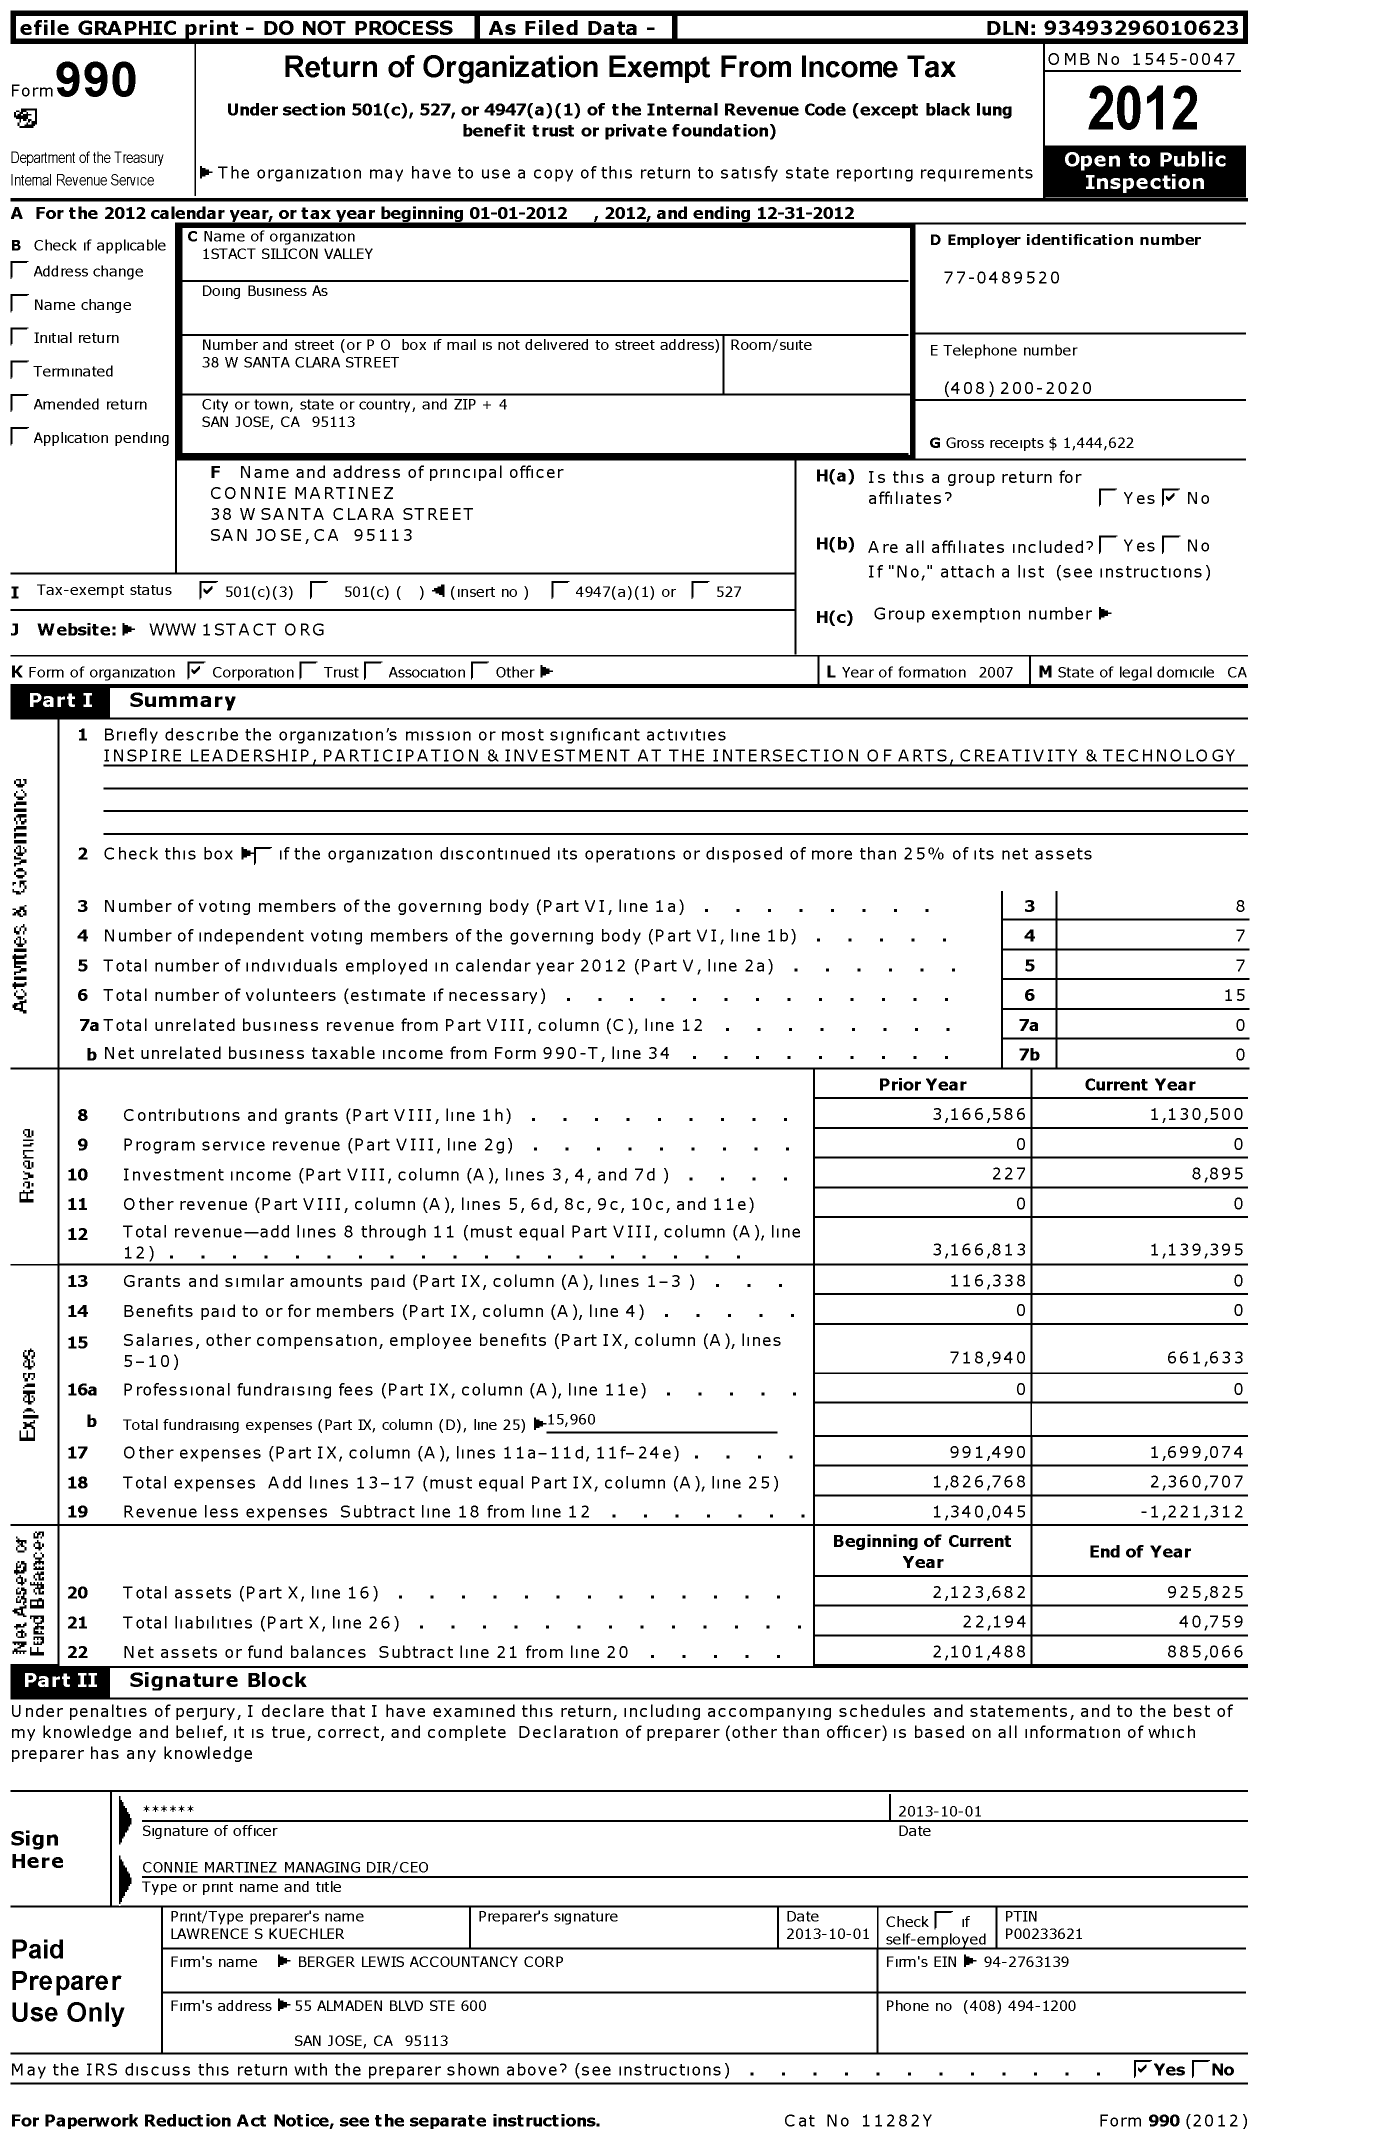 Image of first page of 2012 Form 990 for 1stact Silicon Valley